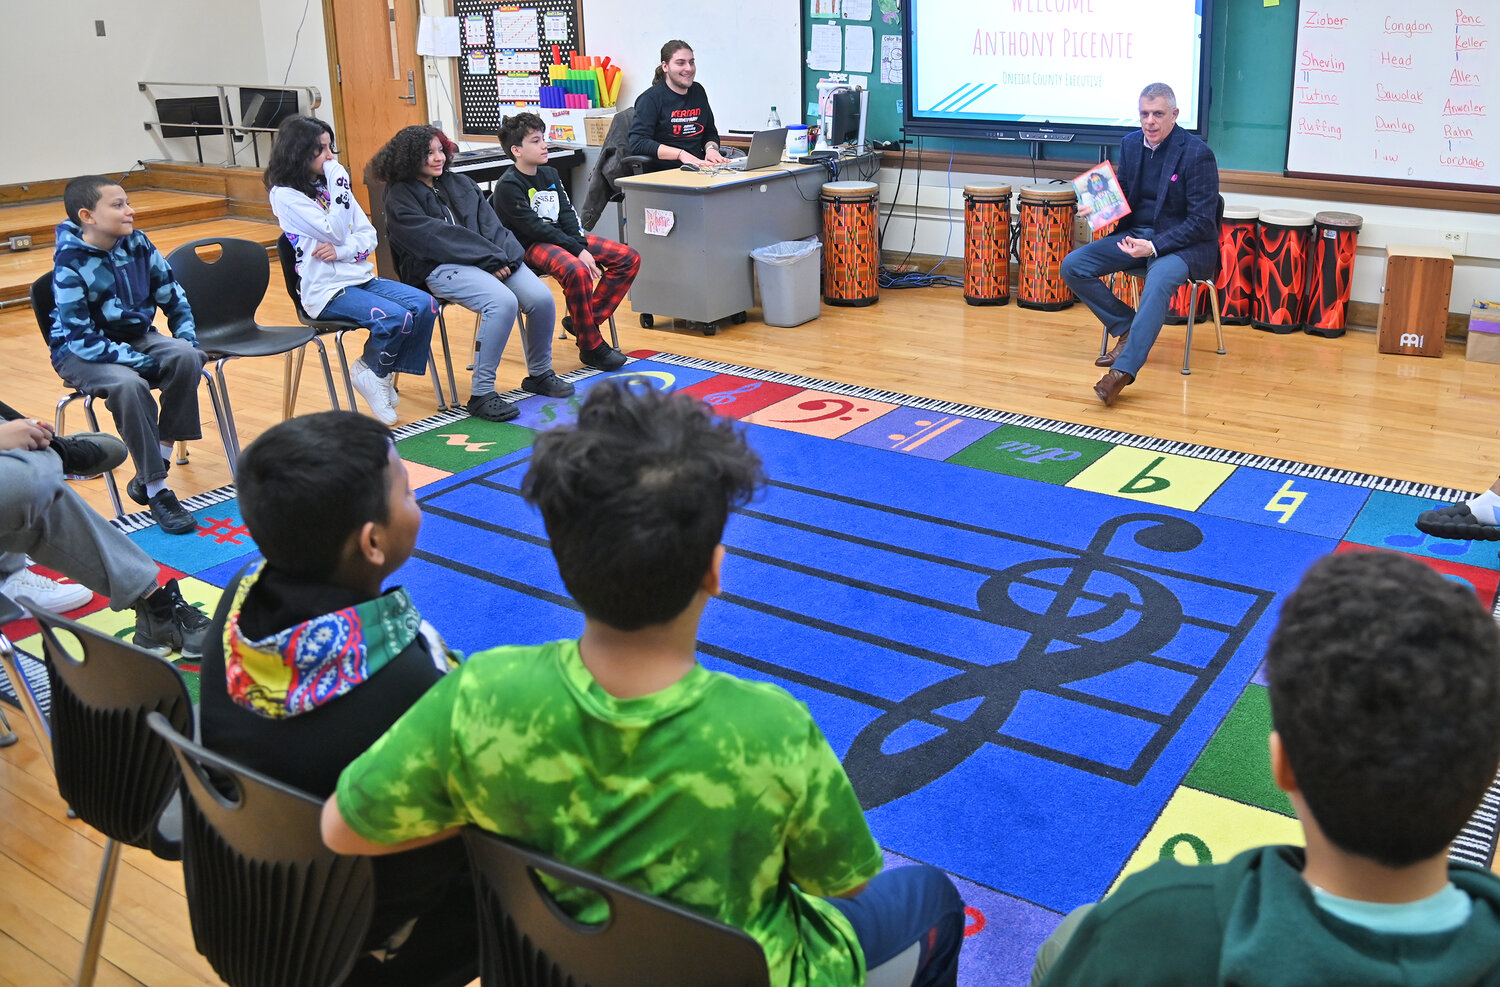 Oneida County Executive Anthony Picente reads "A Bad Case of Stripes" to a music class Friday, March 24 during Community Reader's Day at Kernan Elementary School in Utica.